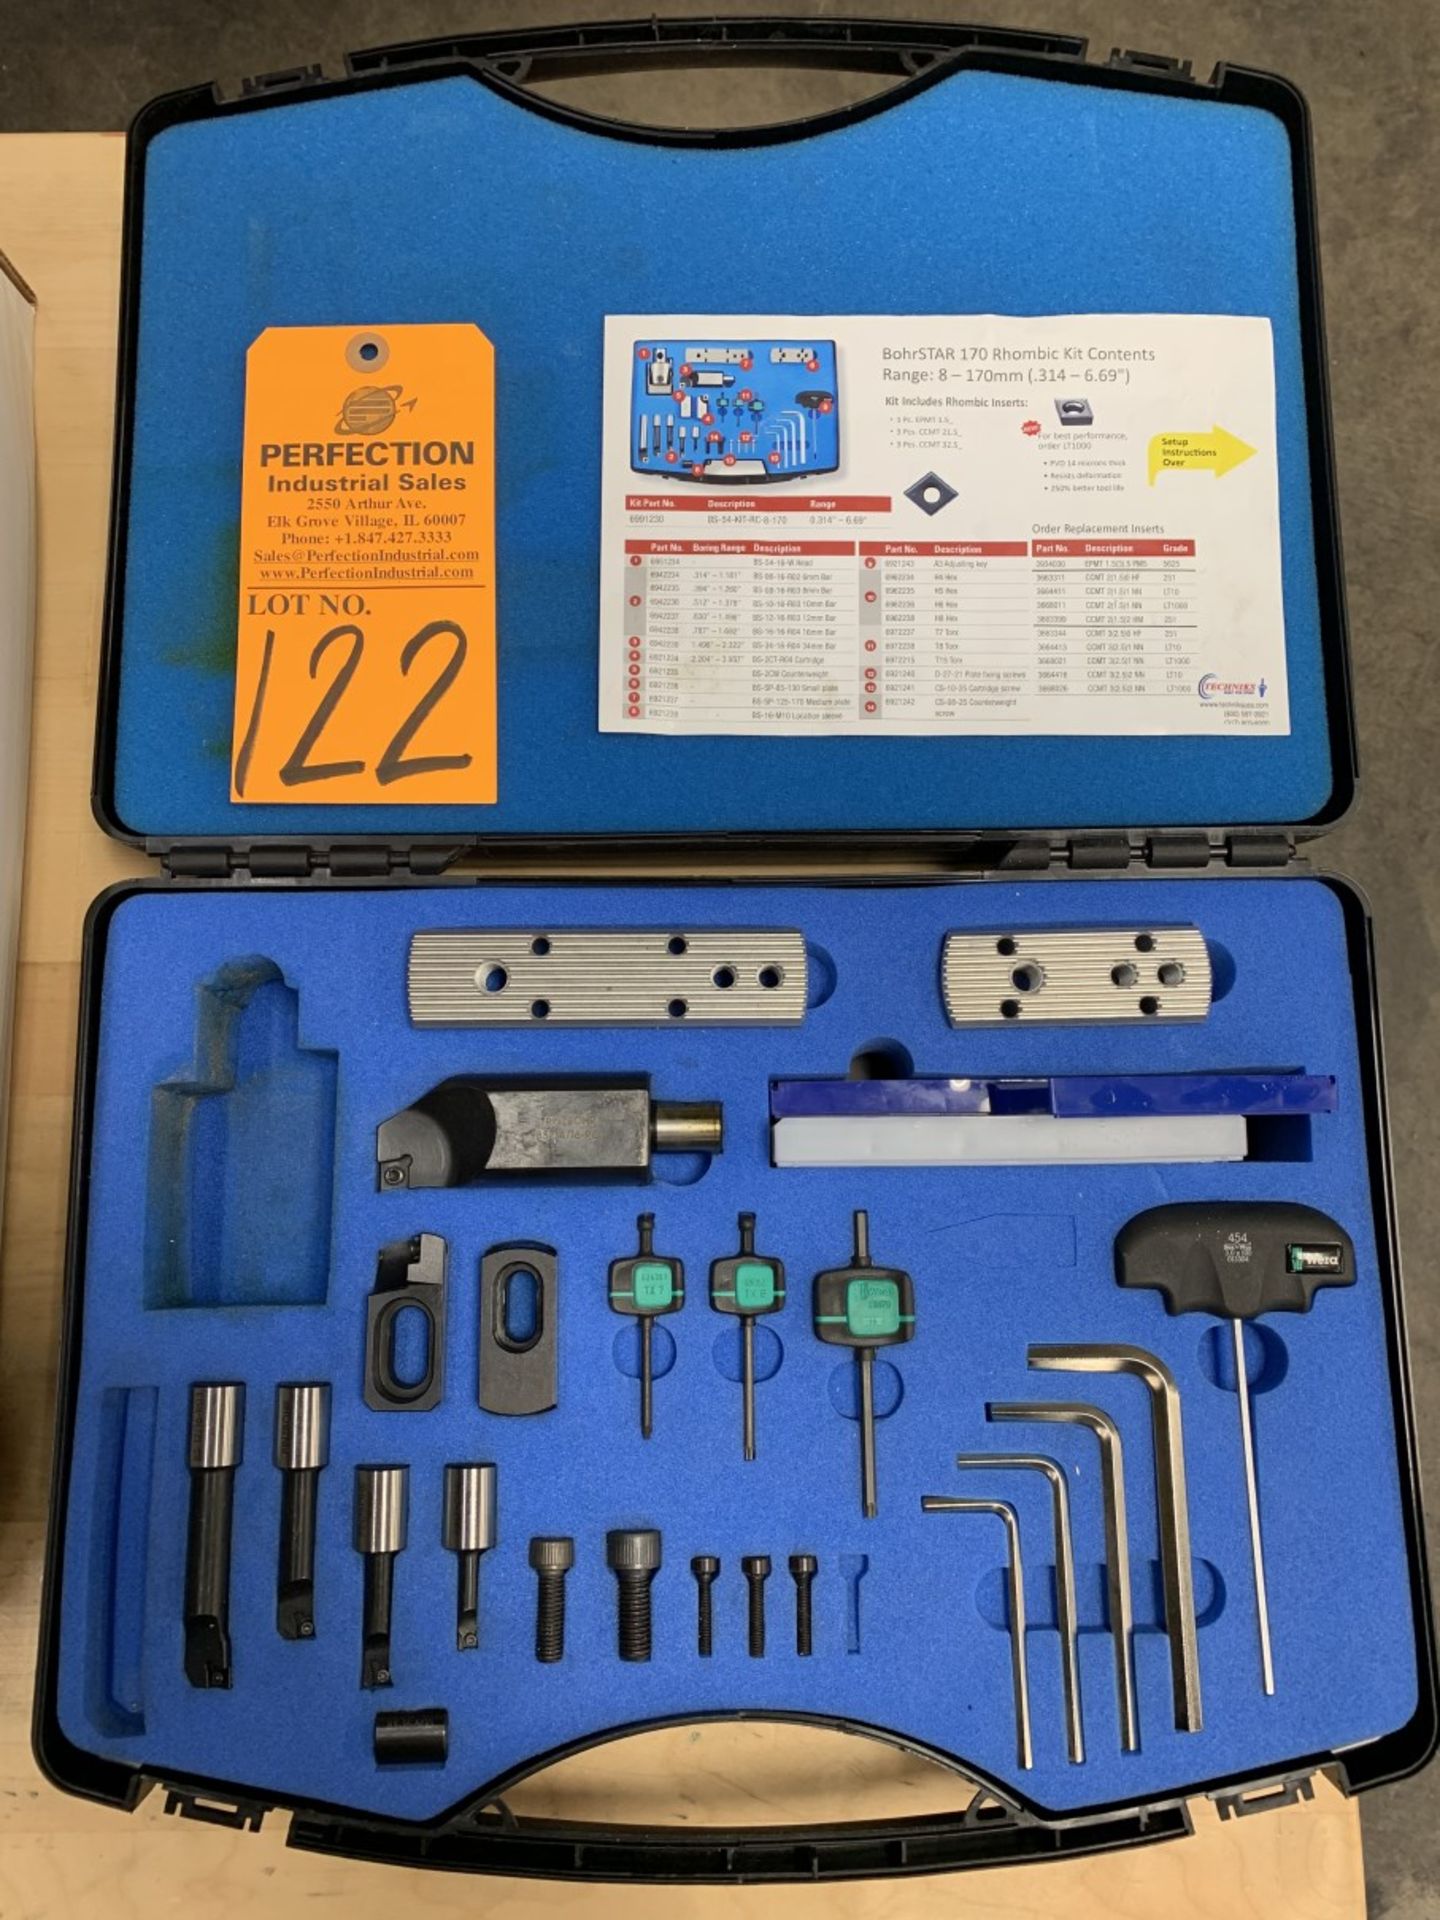 BohrSTAR 170 Rhombic Tooling Kit (Located at: R & D Components)